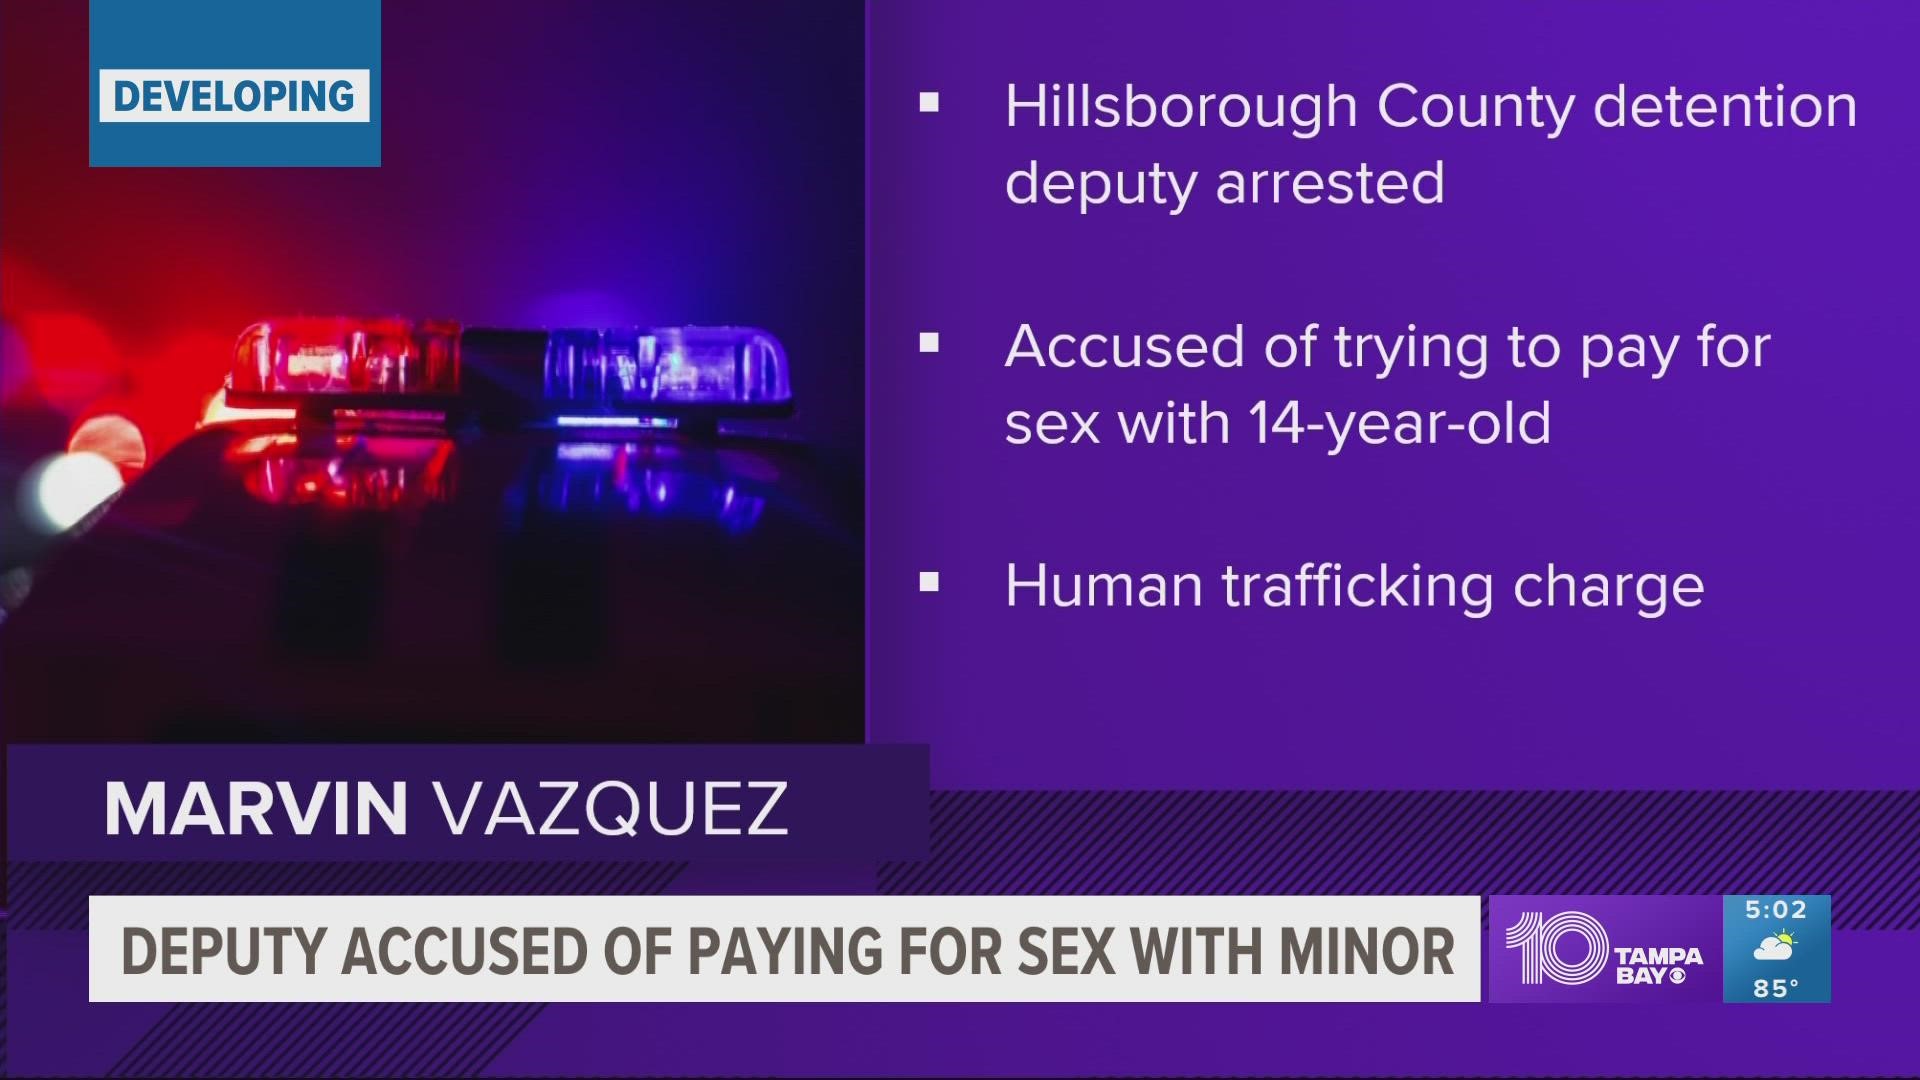 Marvin Vazquez is charged with human trafficking, the sheriff's office said.